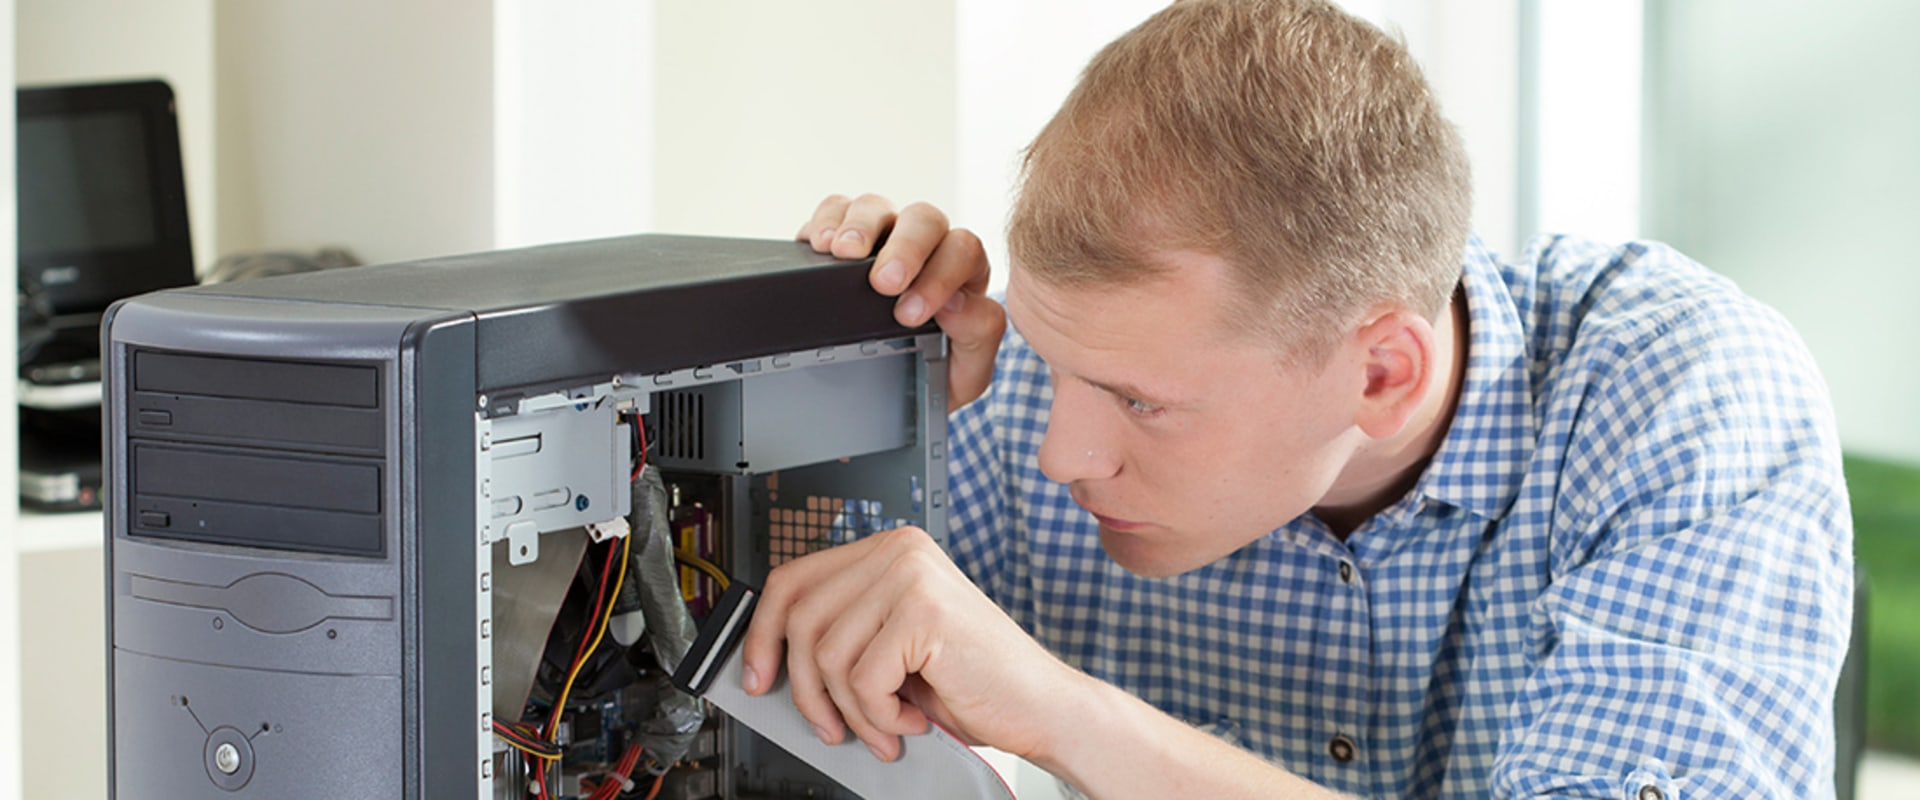 What are the different types of computer technician?